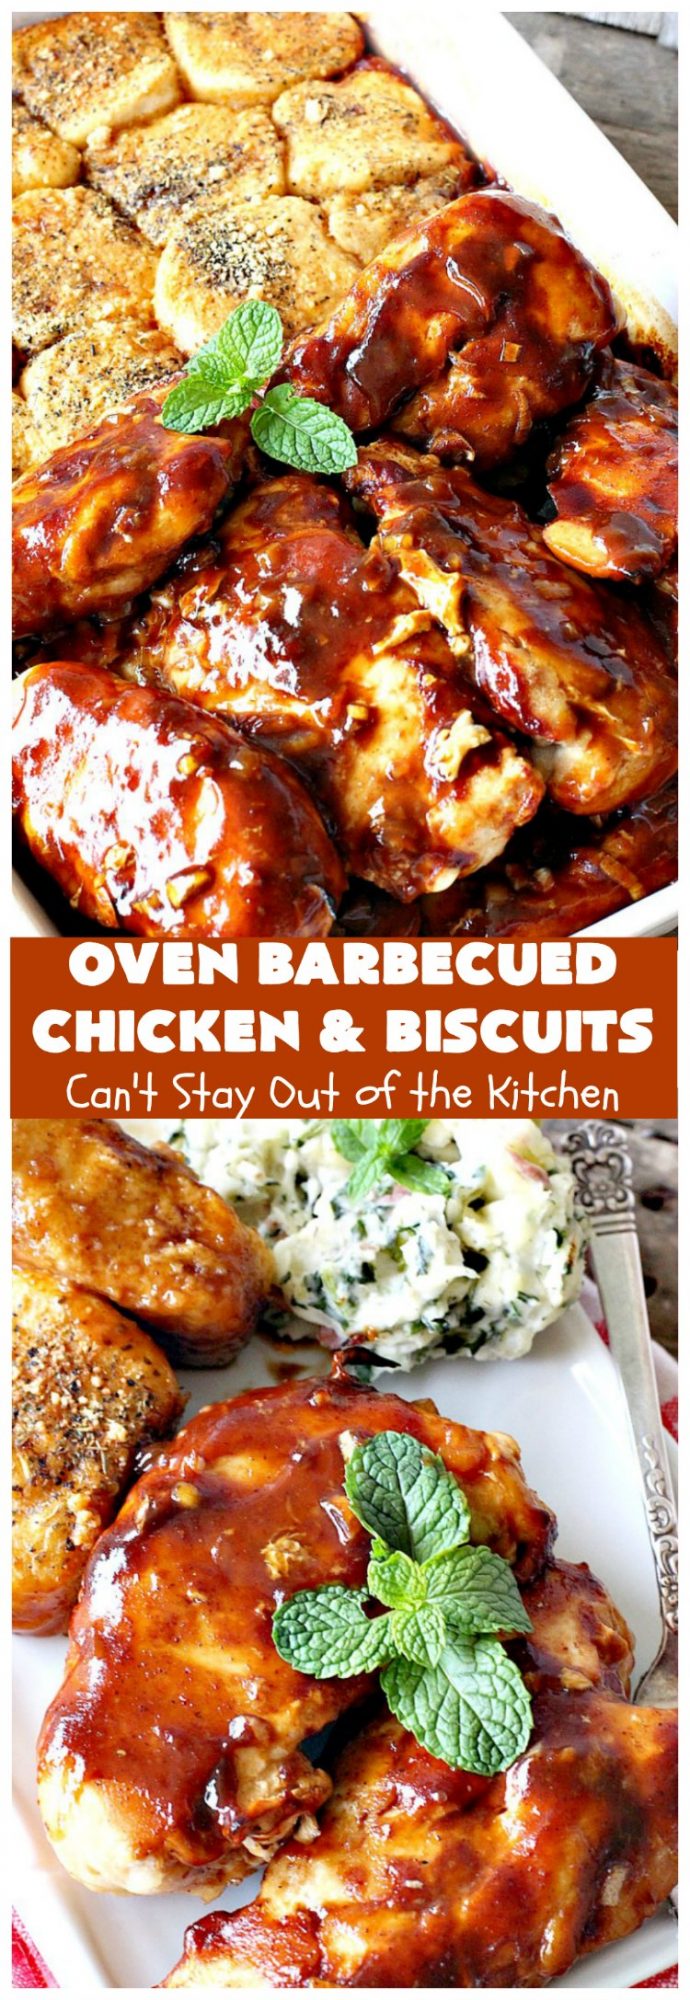 Oven Barbecued Chicken and Biscuits – Can't Stay Out of the Kitchen